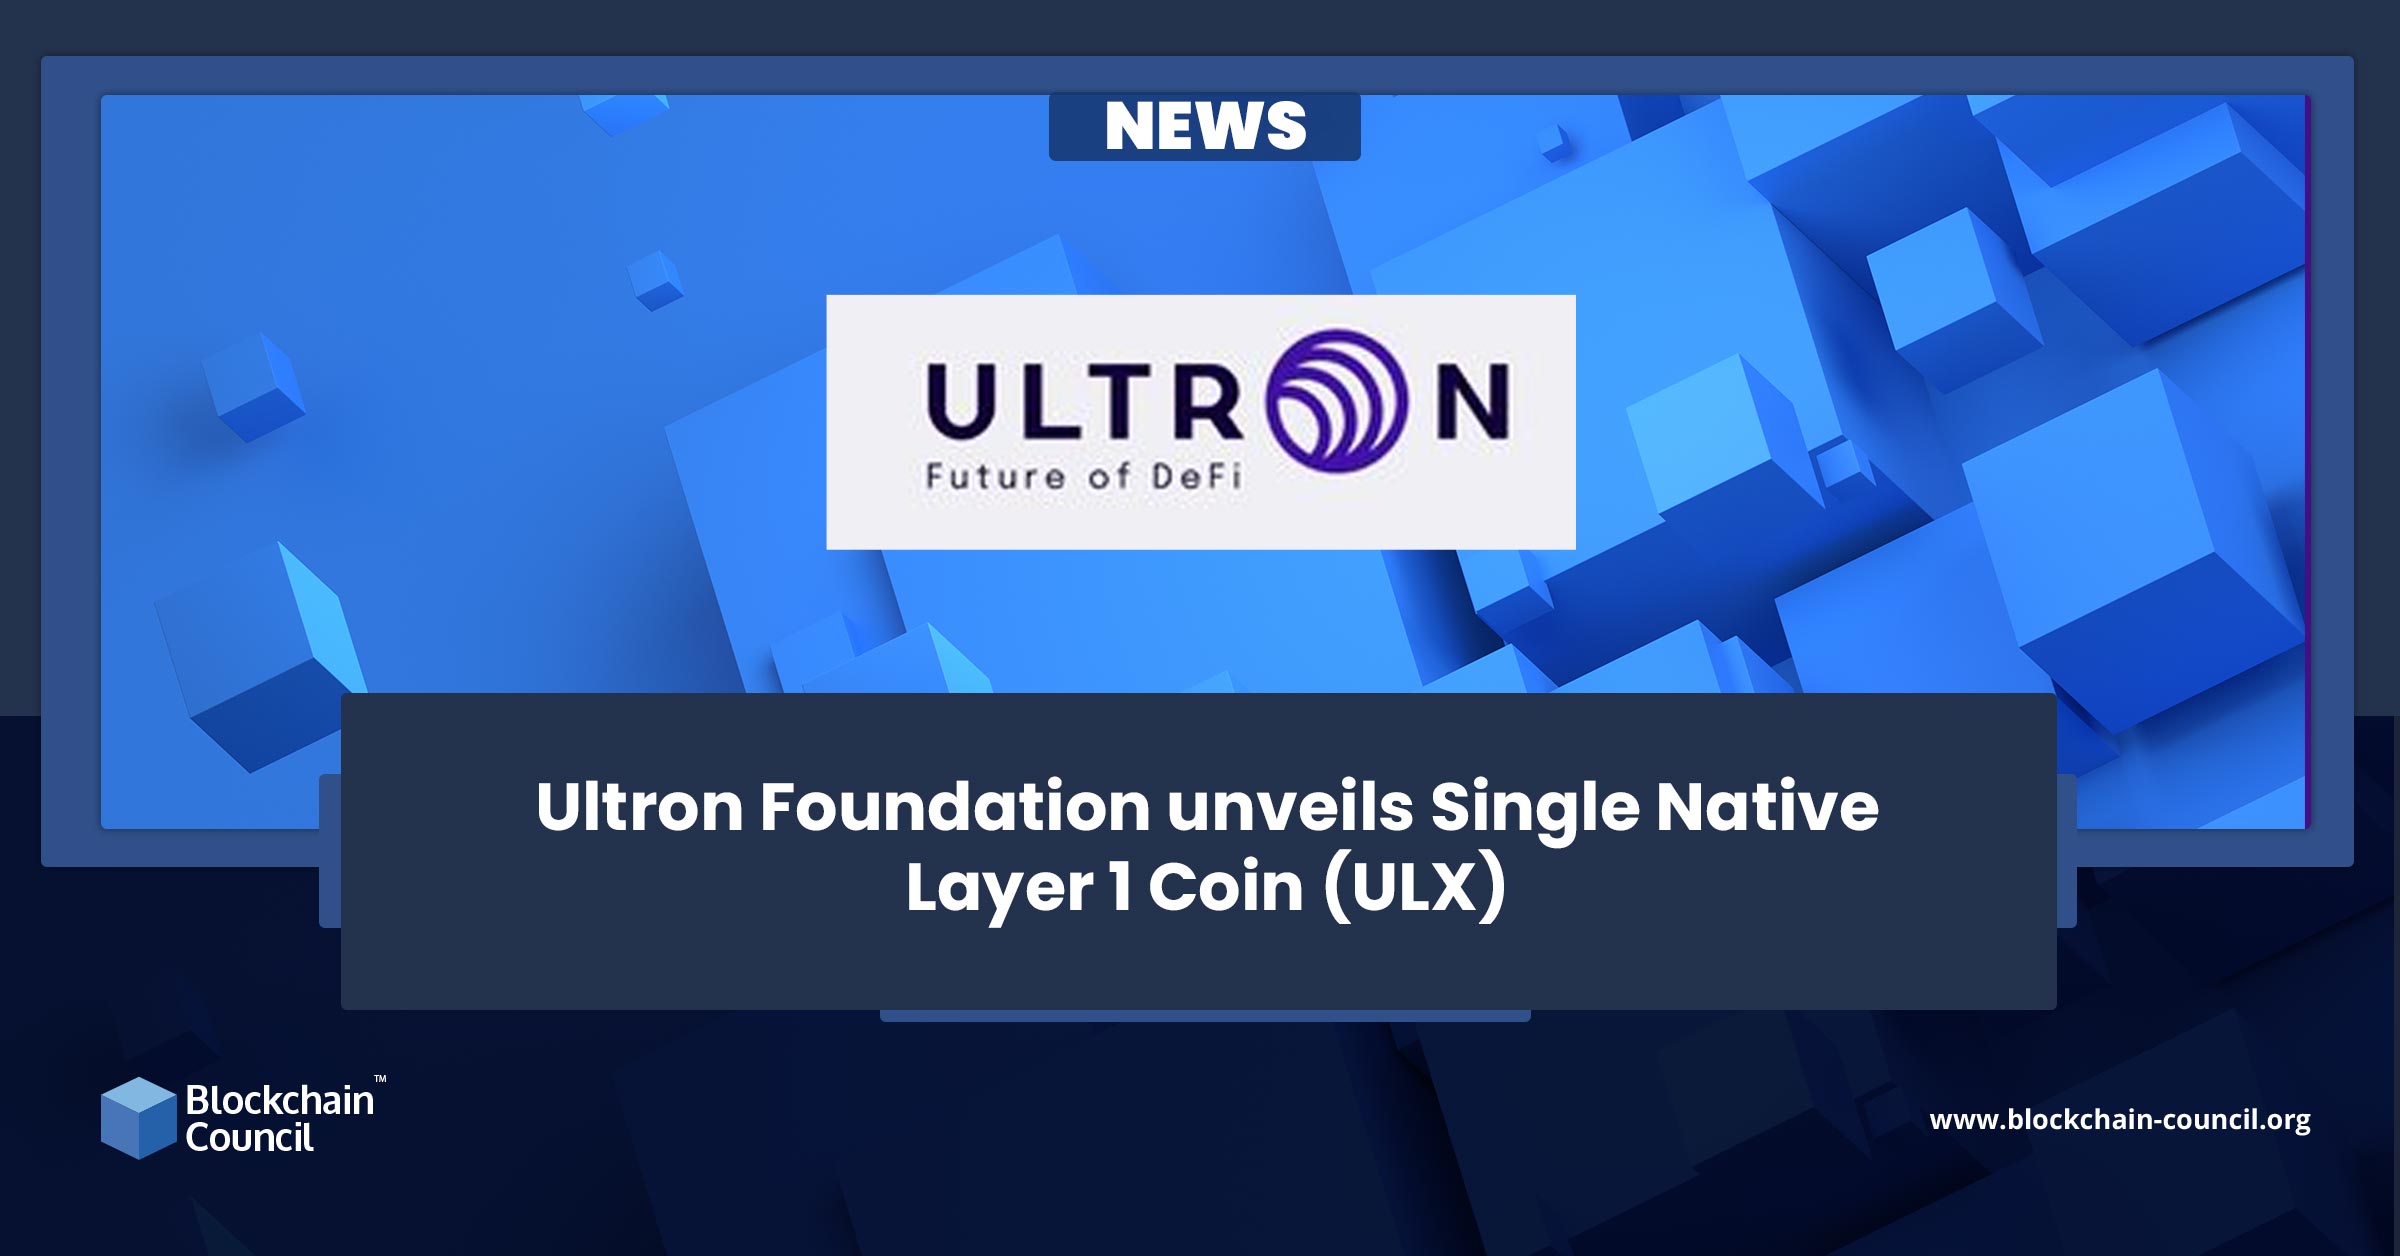 The Ultron Foundation releases the world’s first single native Layer 1 coin (ULX)